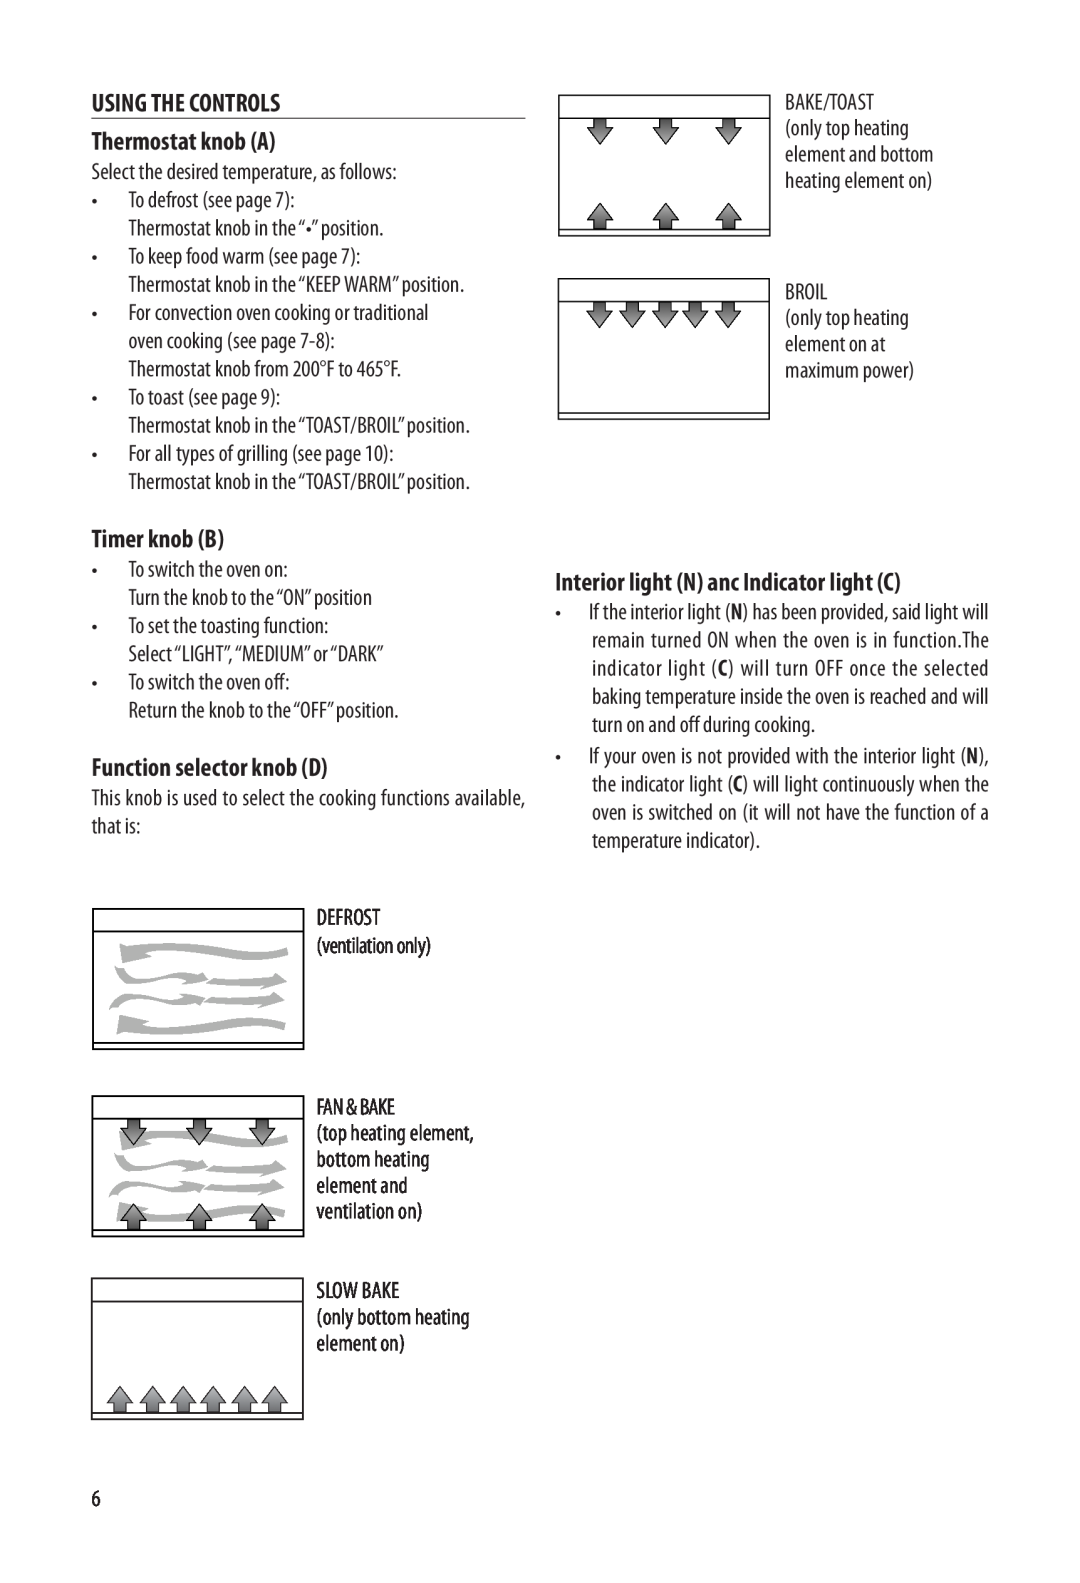 DeLonghi EO1270 1B specifications USING THE CONTROLS Thermostat knob A, Timer knob B, Function selector knob D 